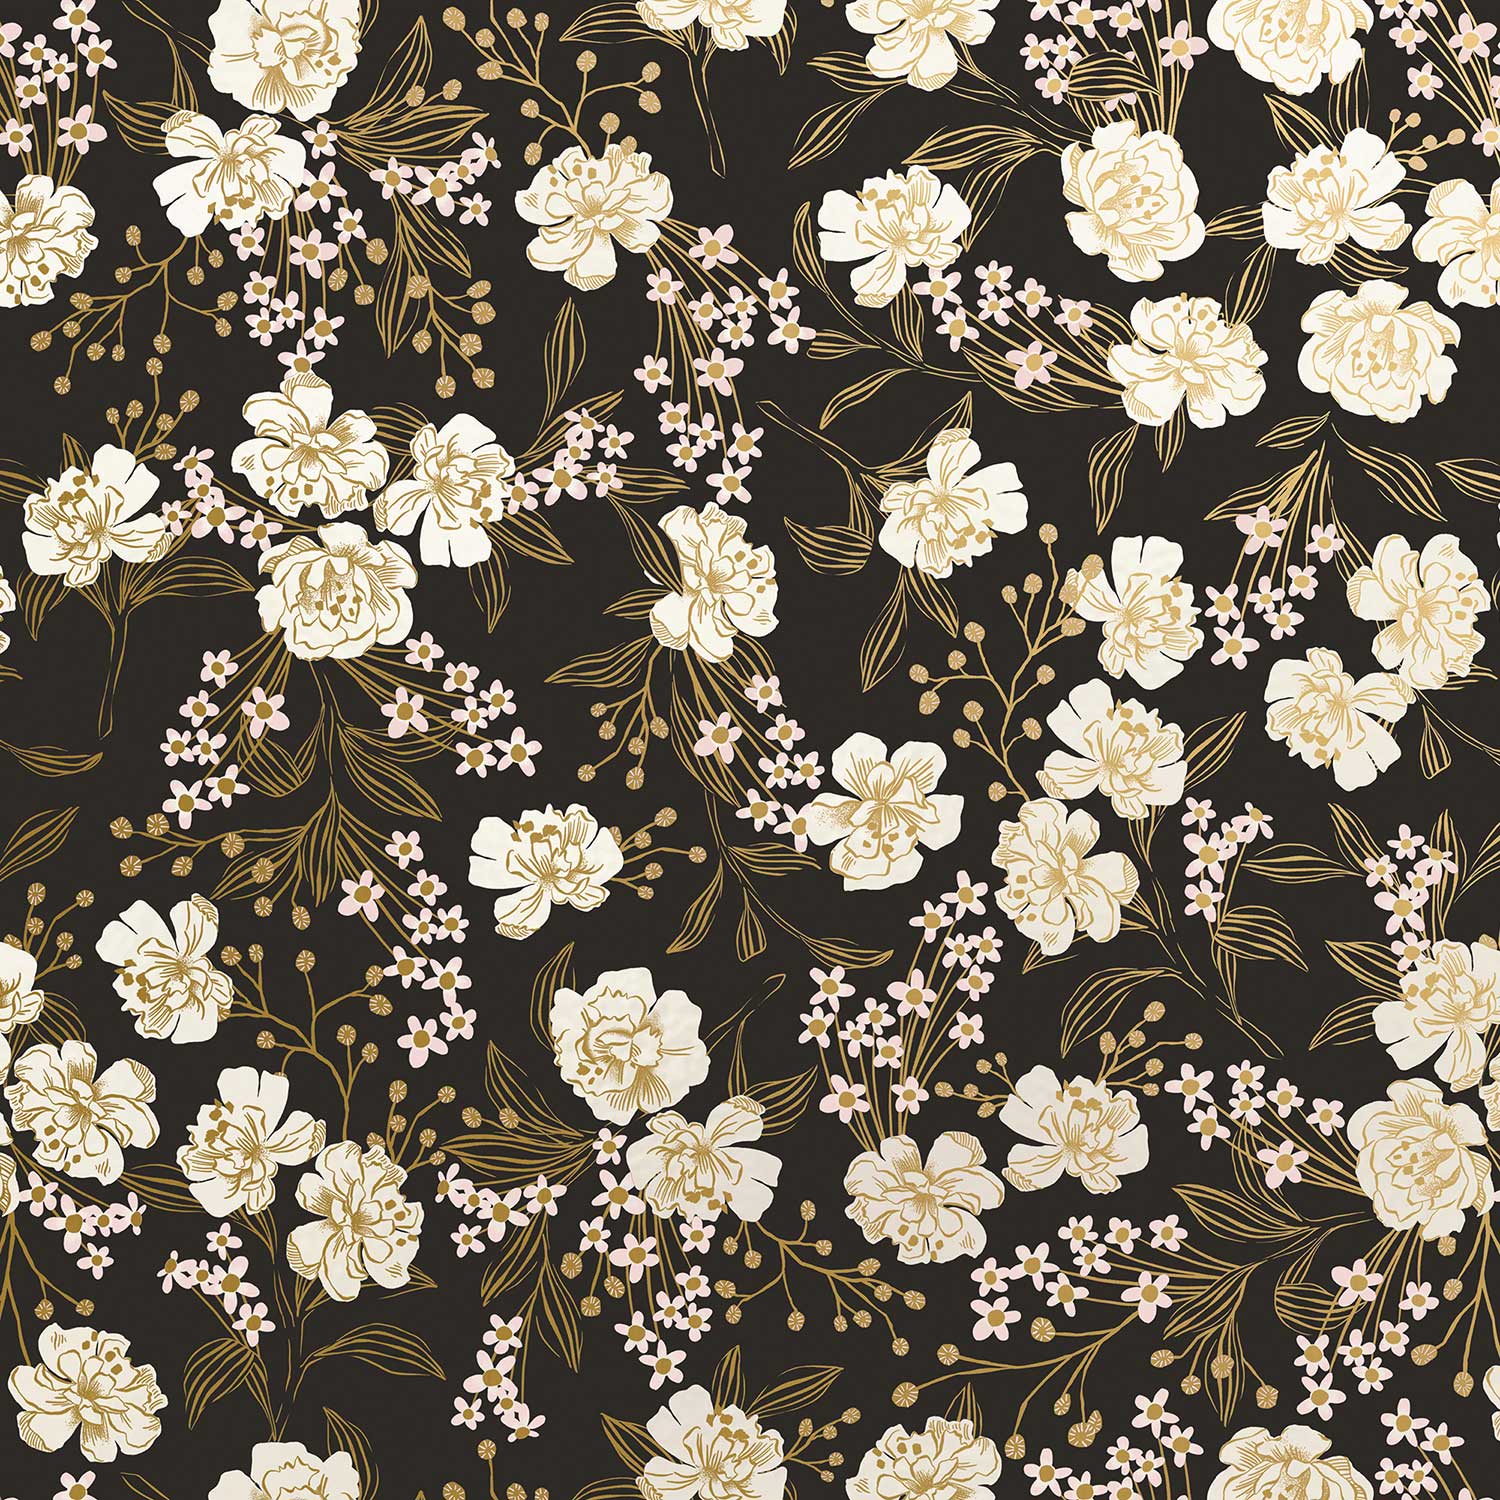 Retro Floral Charcoal Gift Wrap 1/4 Ream 208 ft x 24 in